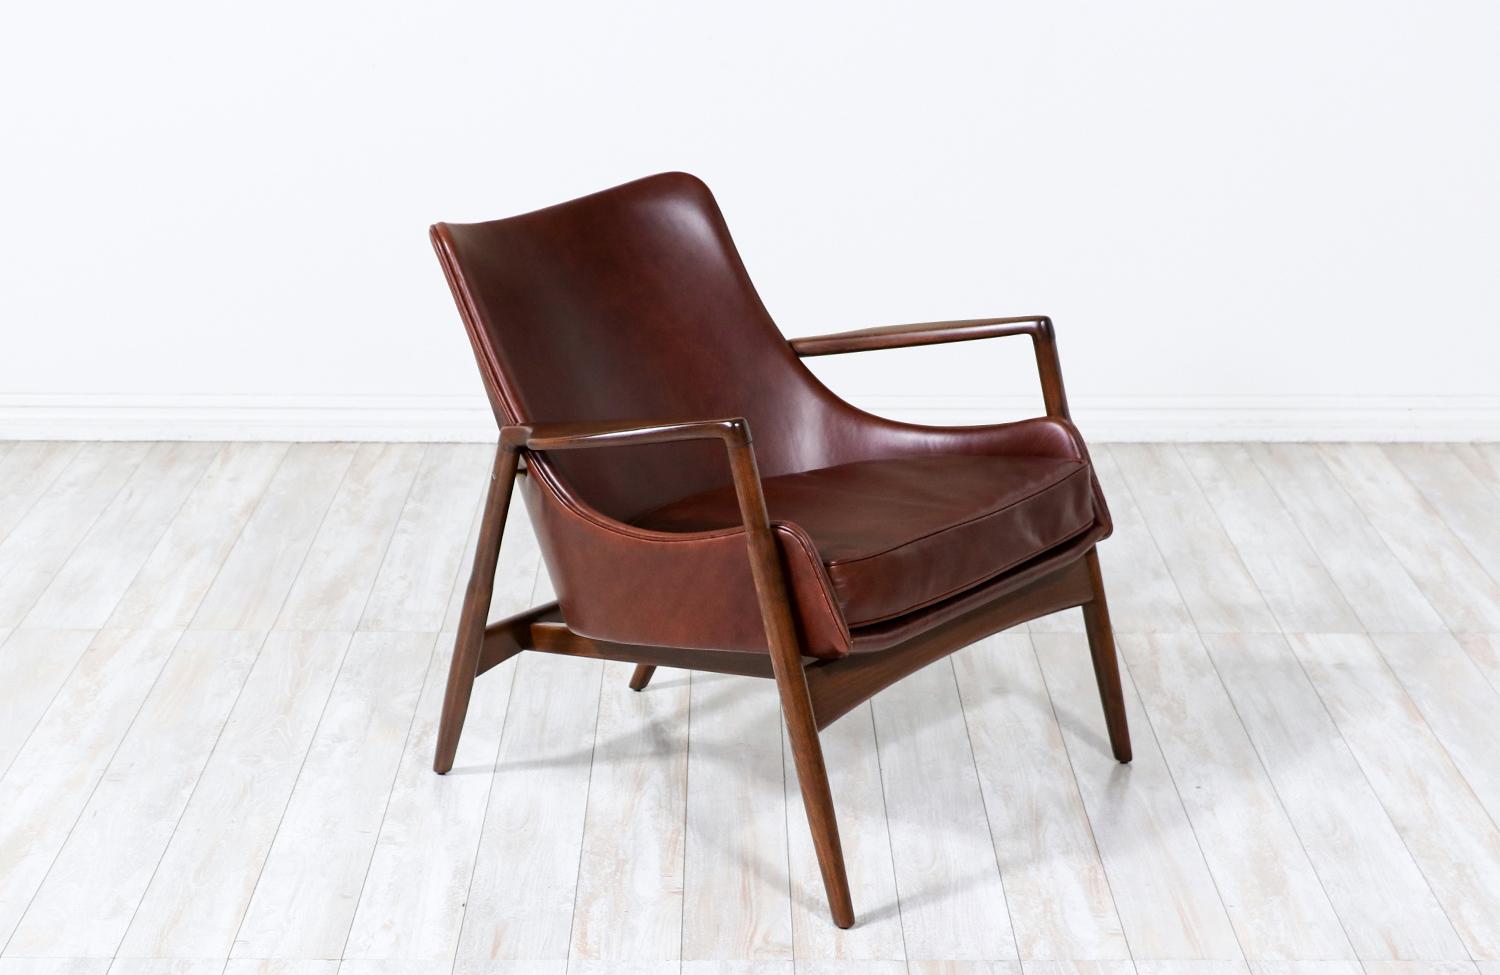 Ib Kofod-Larsen Cognac Leather Lounge Chair for Selig
________________________________________

Transforming a piece of Mid-Century Modern furniture is like bringing history back to life, and we take this journey with passion and precision. With